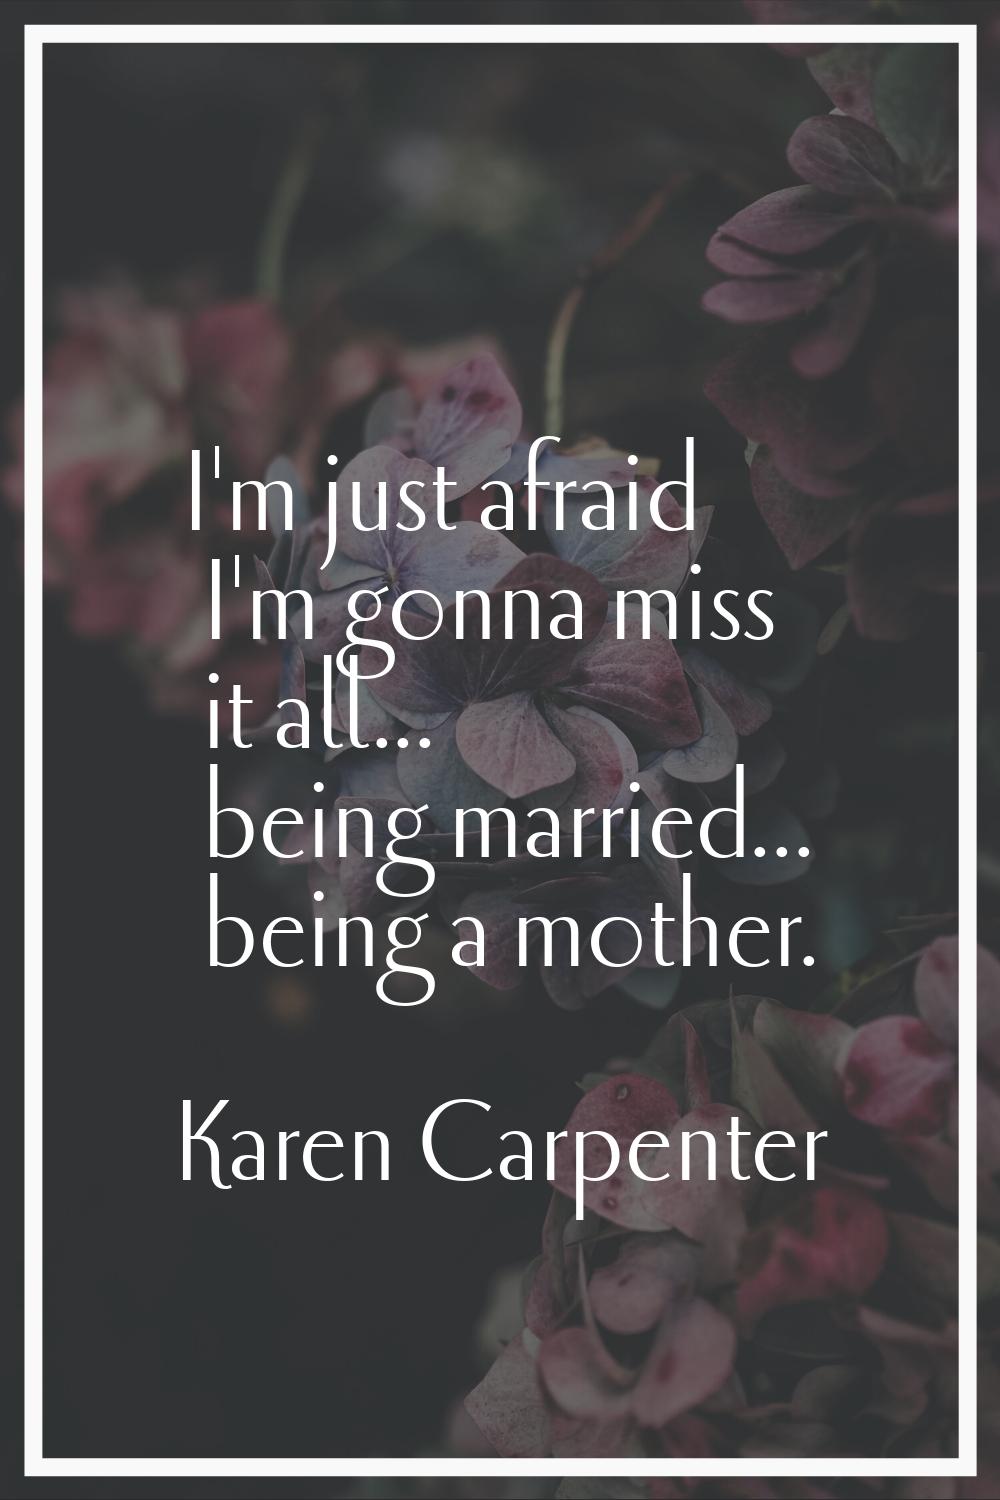 I'm just afraid I'm gonna miss it all... being married... being a mother.